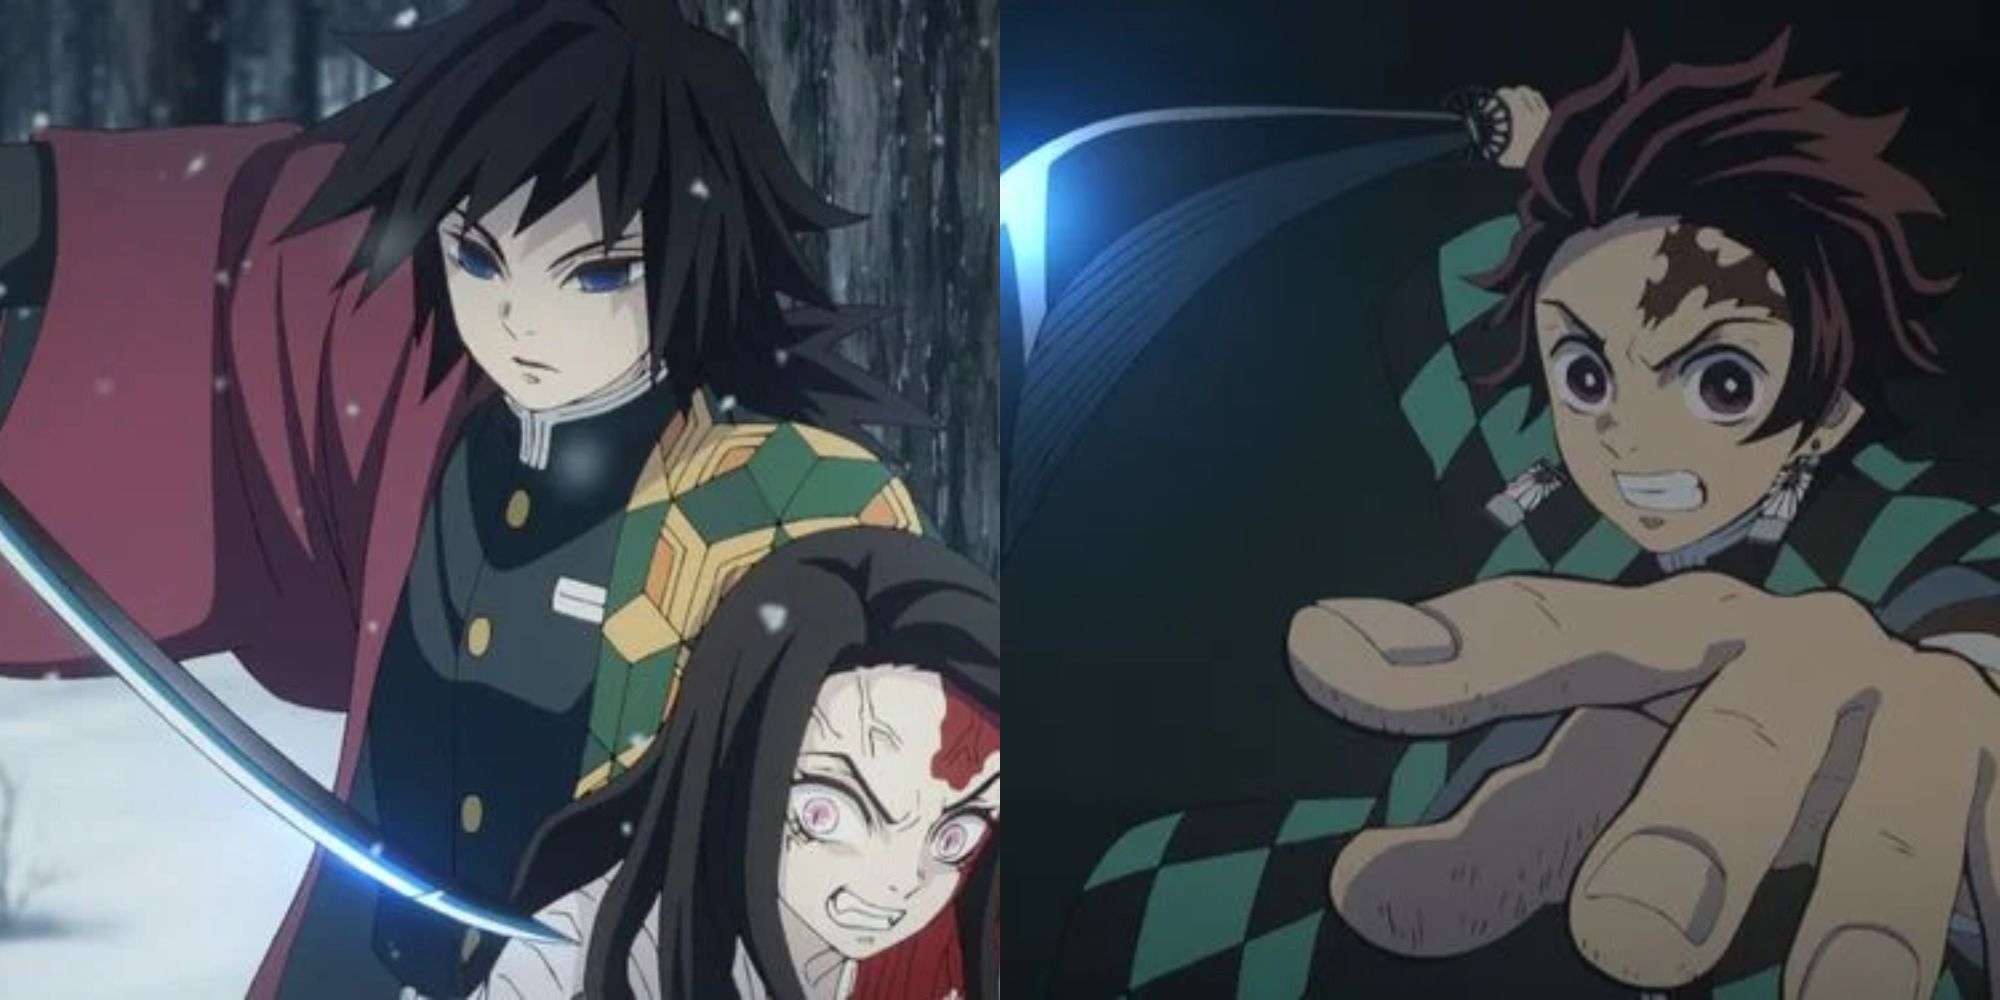 Split image showing two characters wielding a blue and black sword in Demon Slayer.